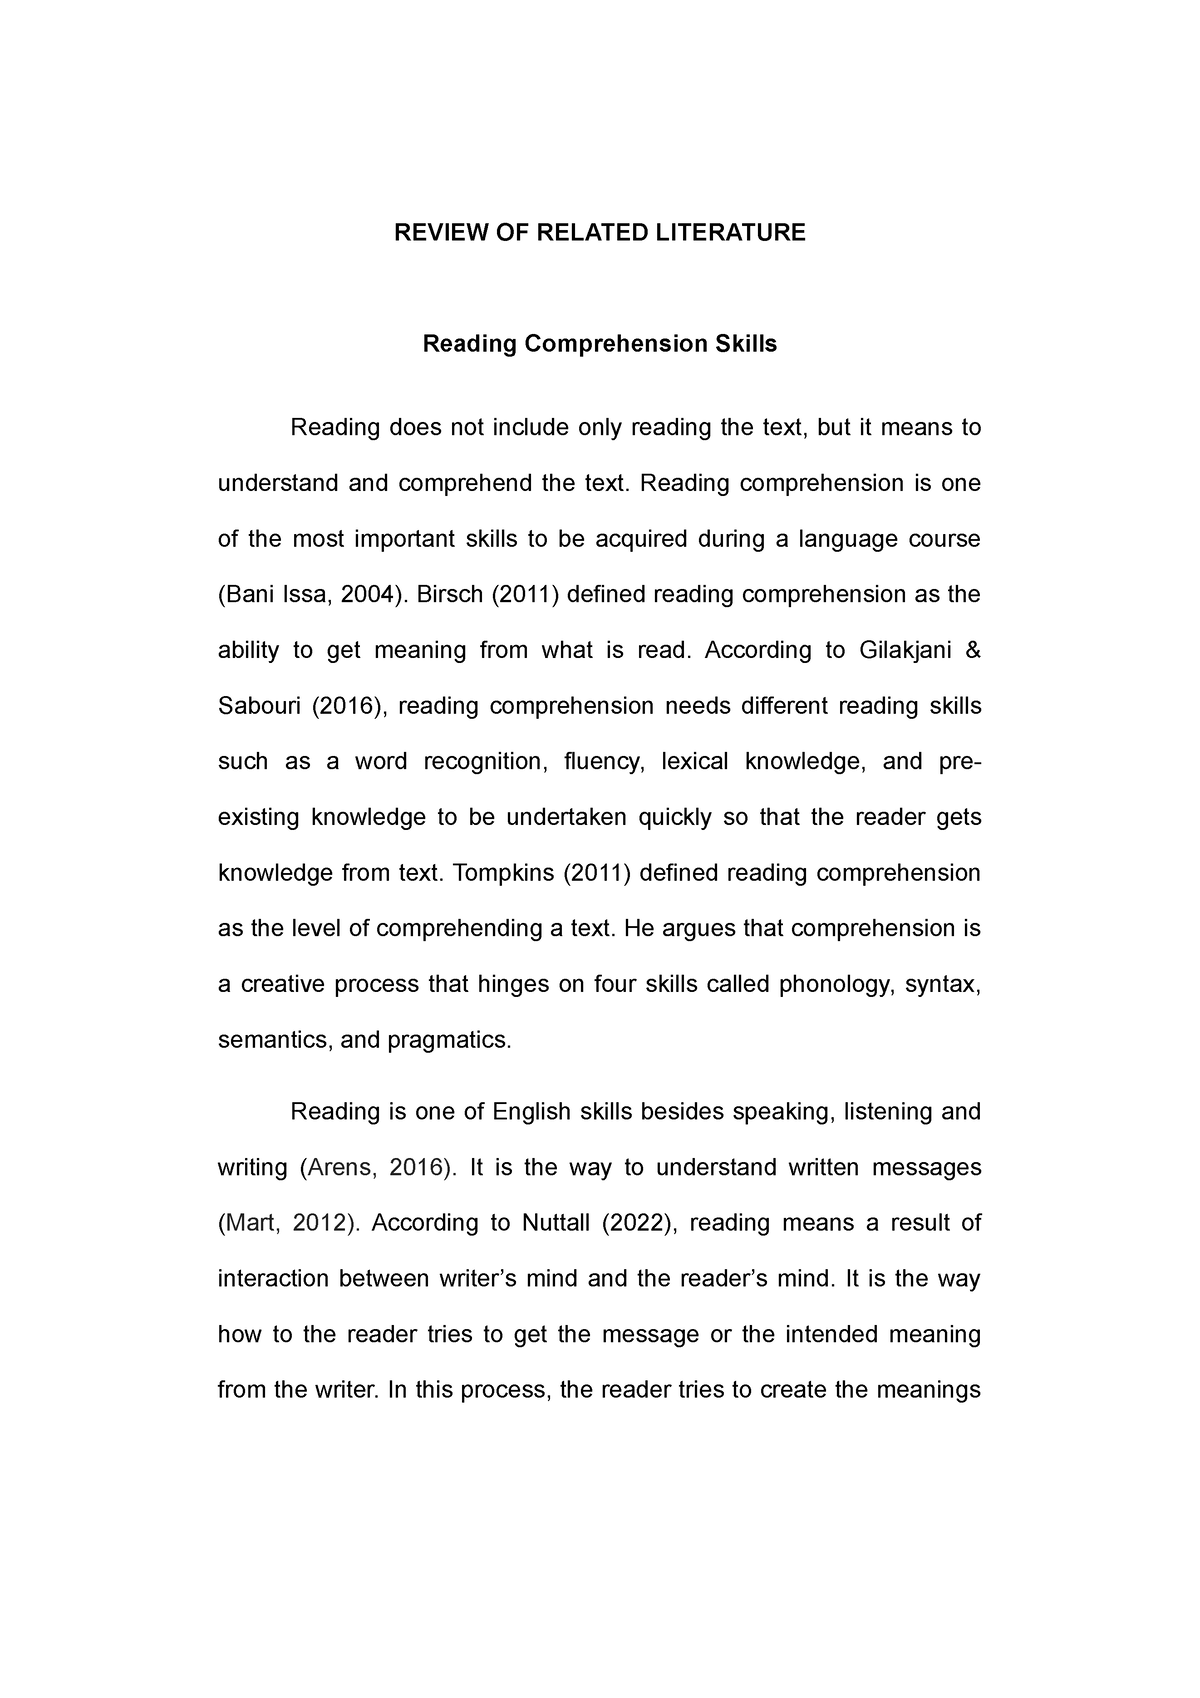 review of related literature on reading comprehension